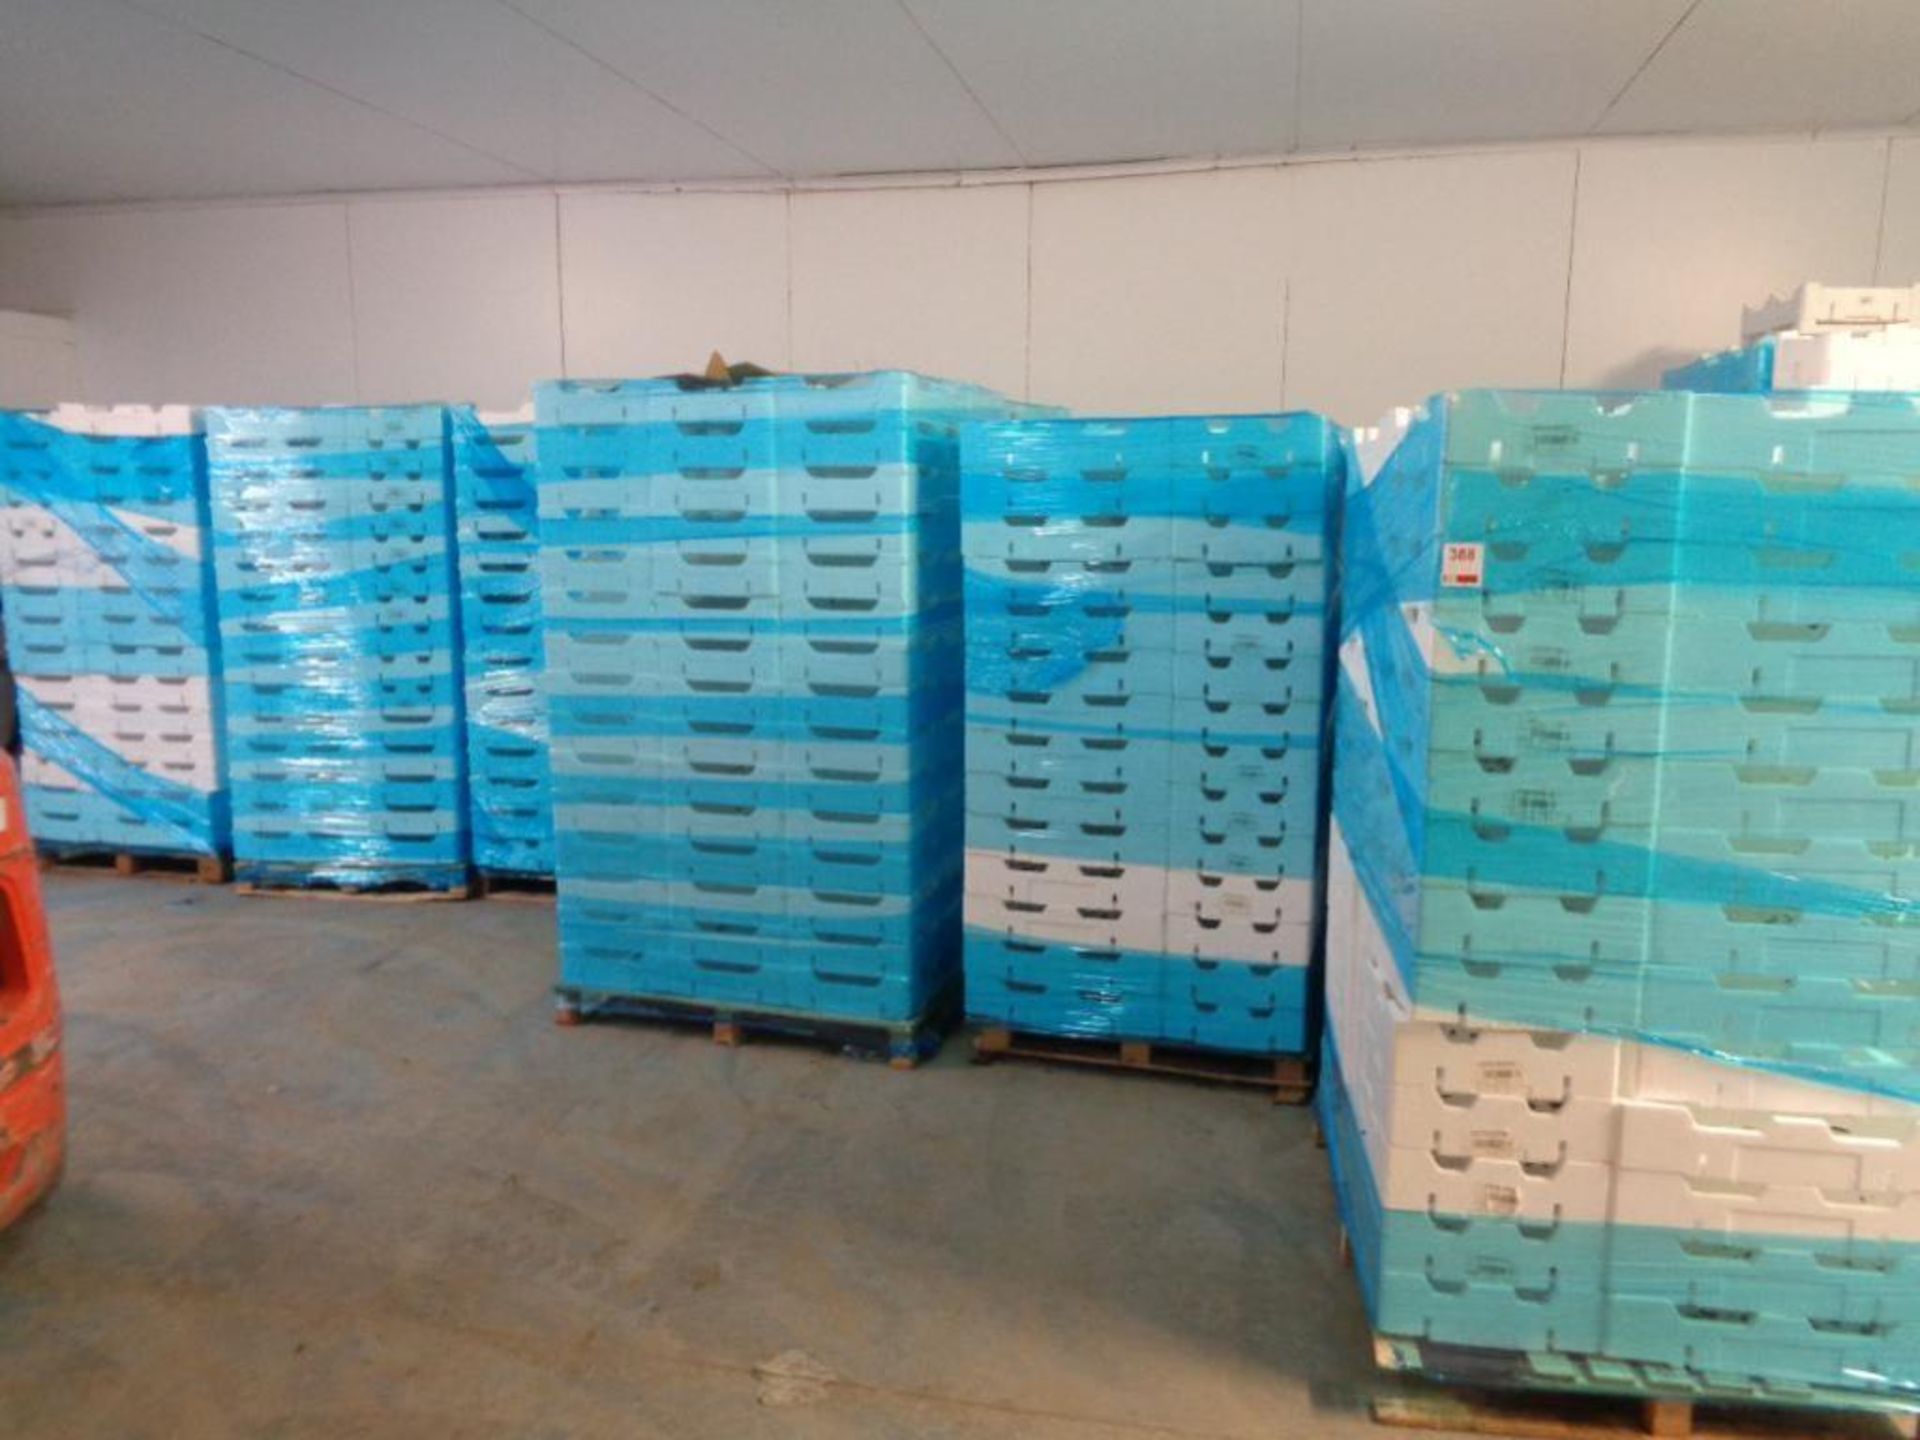 Eight pallets of polystyrene produce boxes